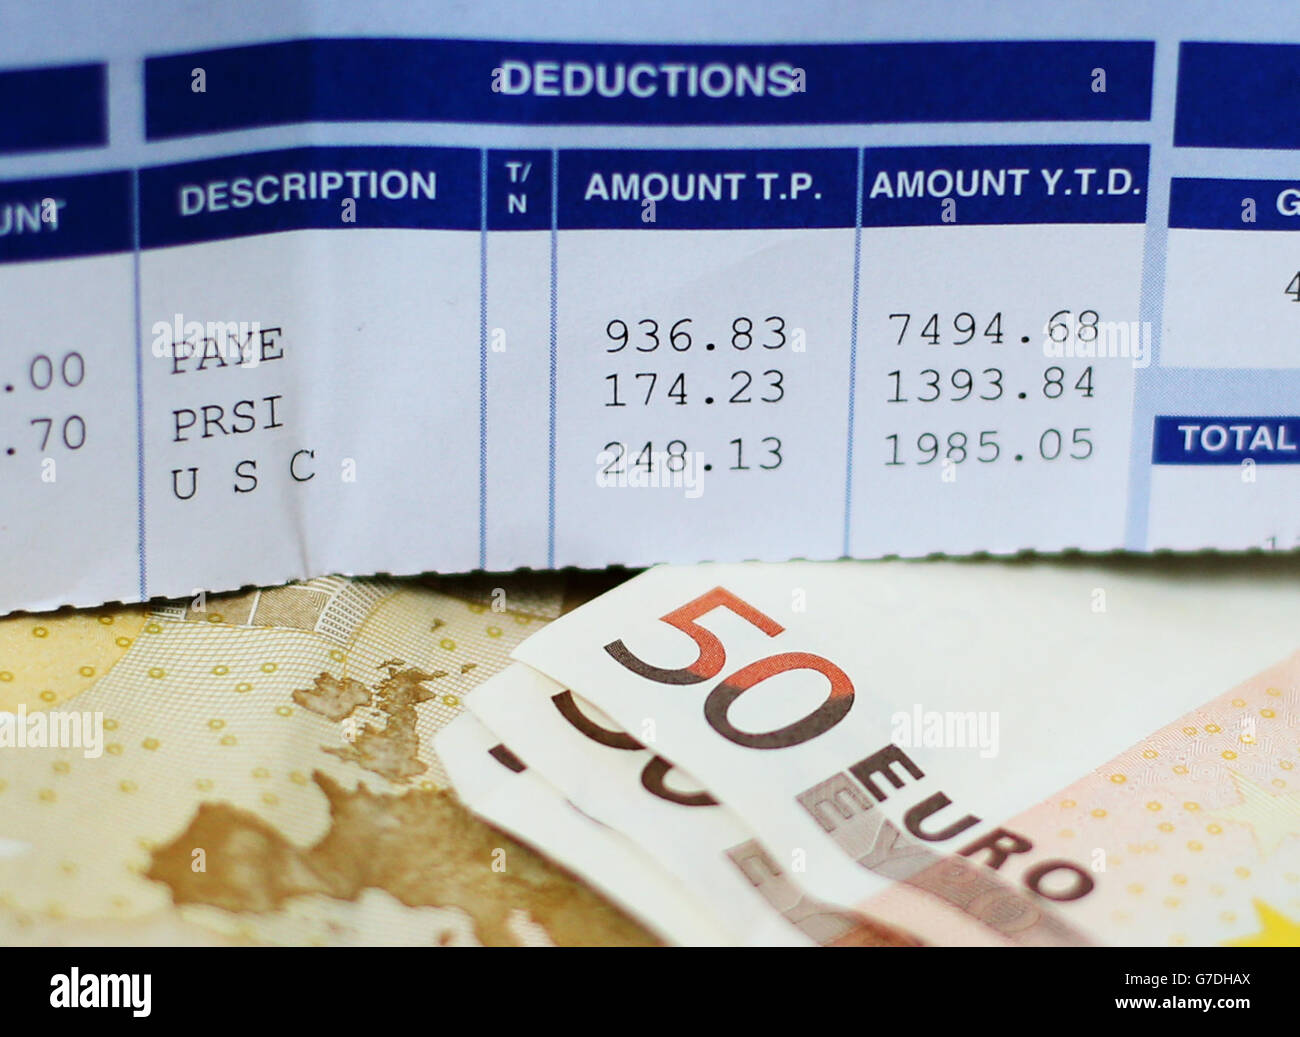 A payslip displaying tax deductions alongside 50 euro notes as Ireland's hard-pressed taxpayers are set for the first easing of austerity in seven years when tax cuts are announced in today's payback budget. Stock Photo